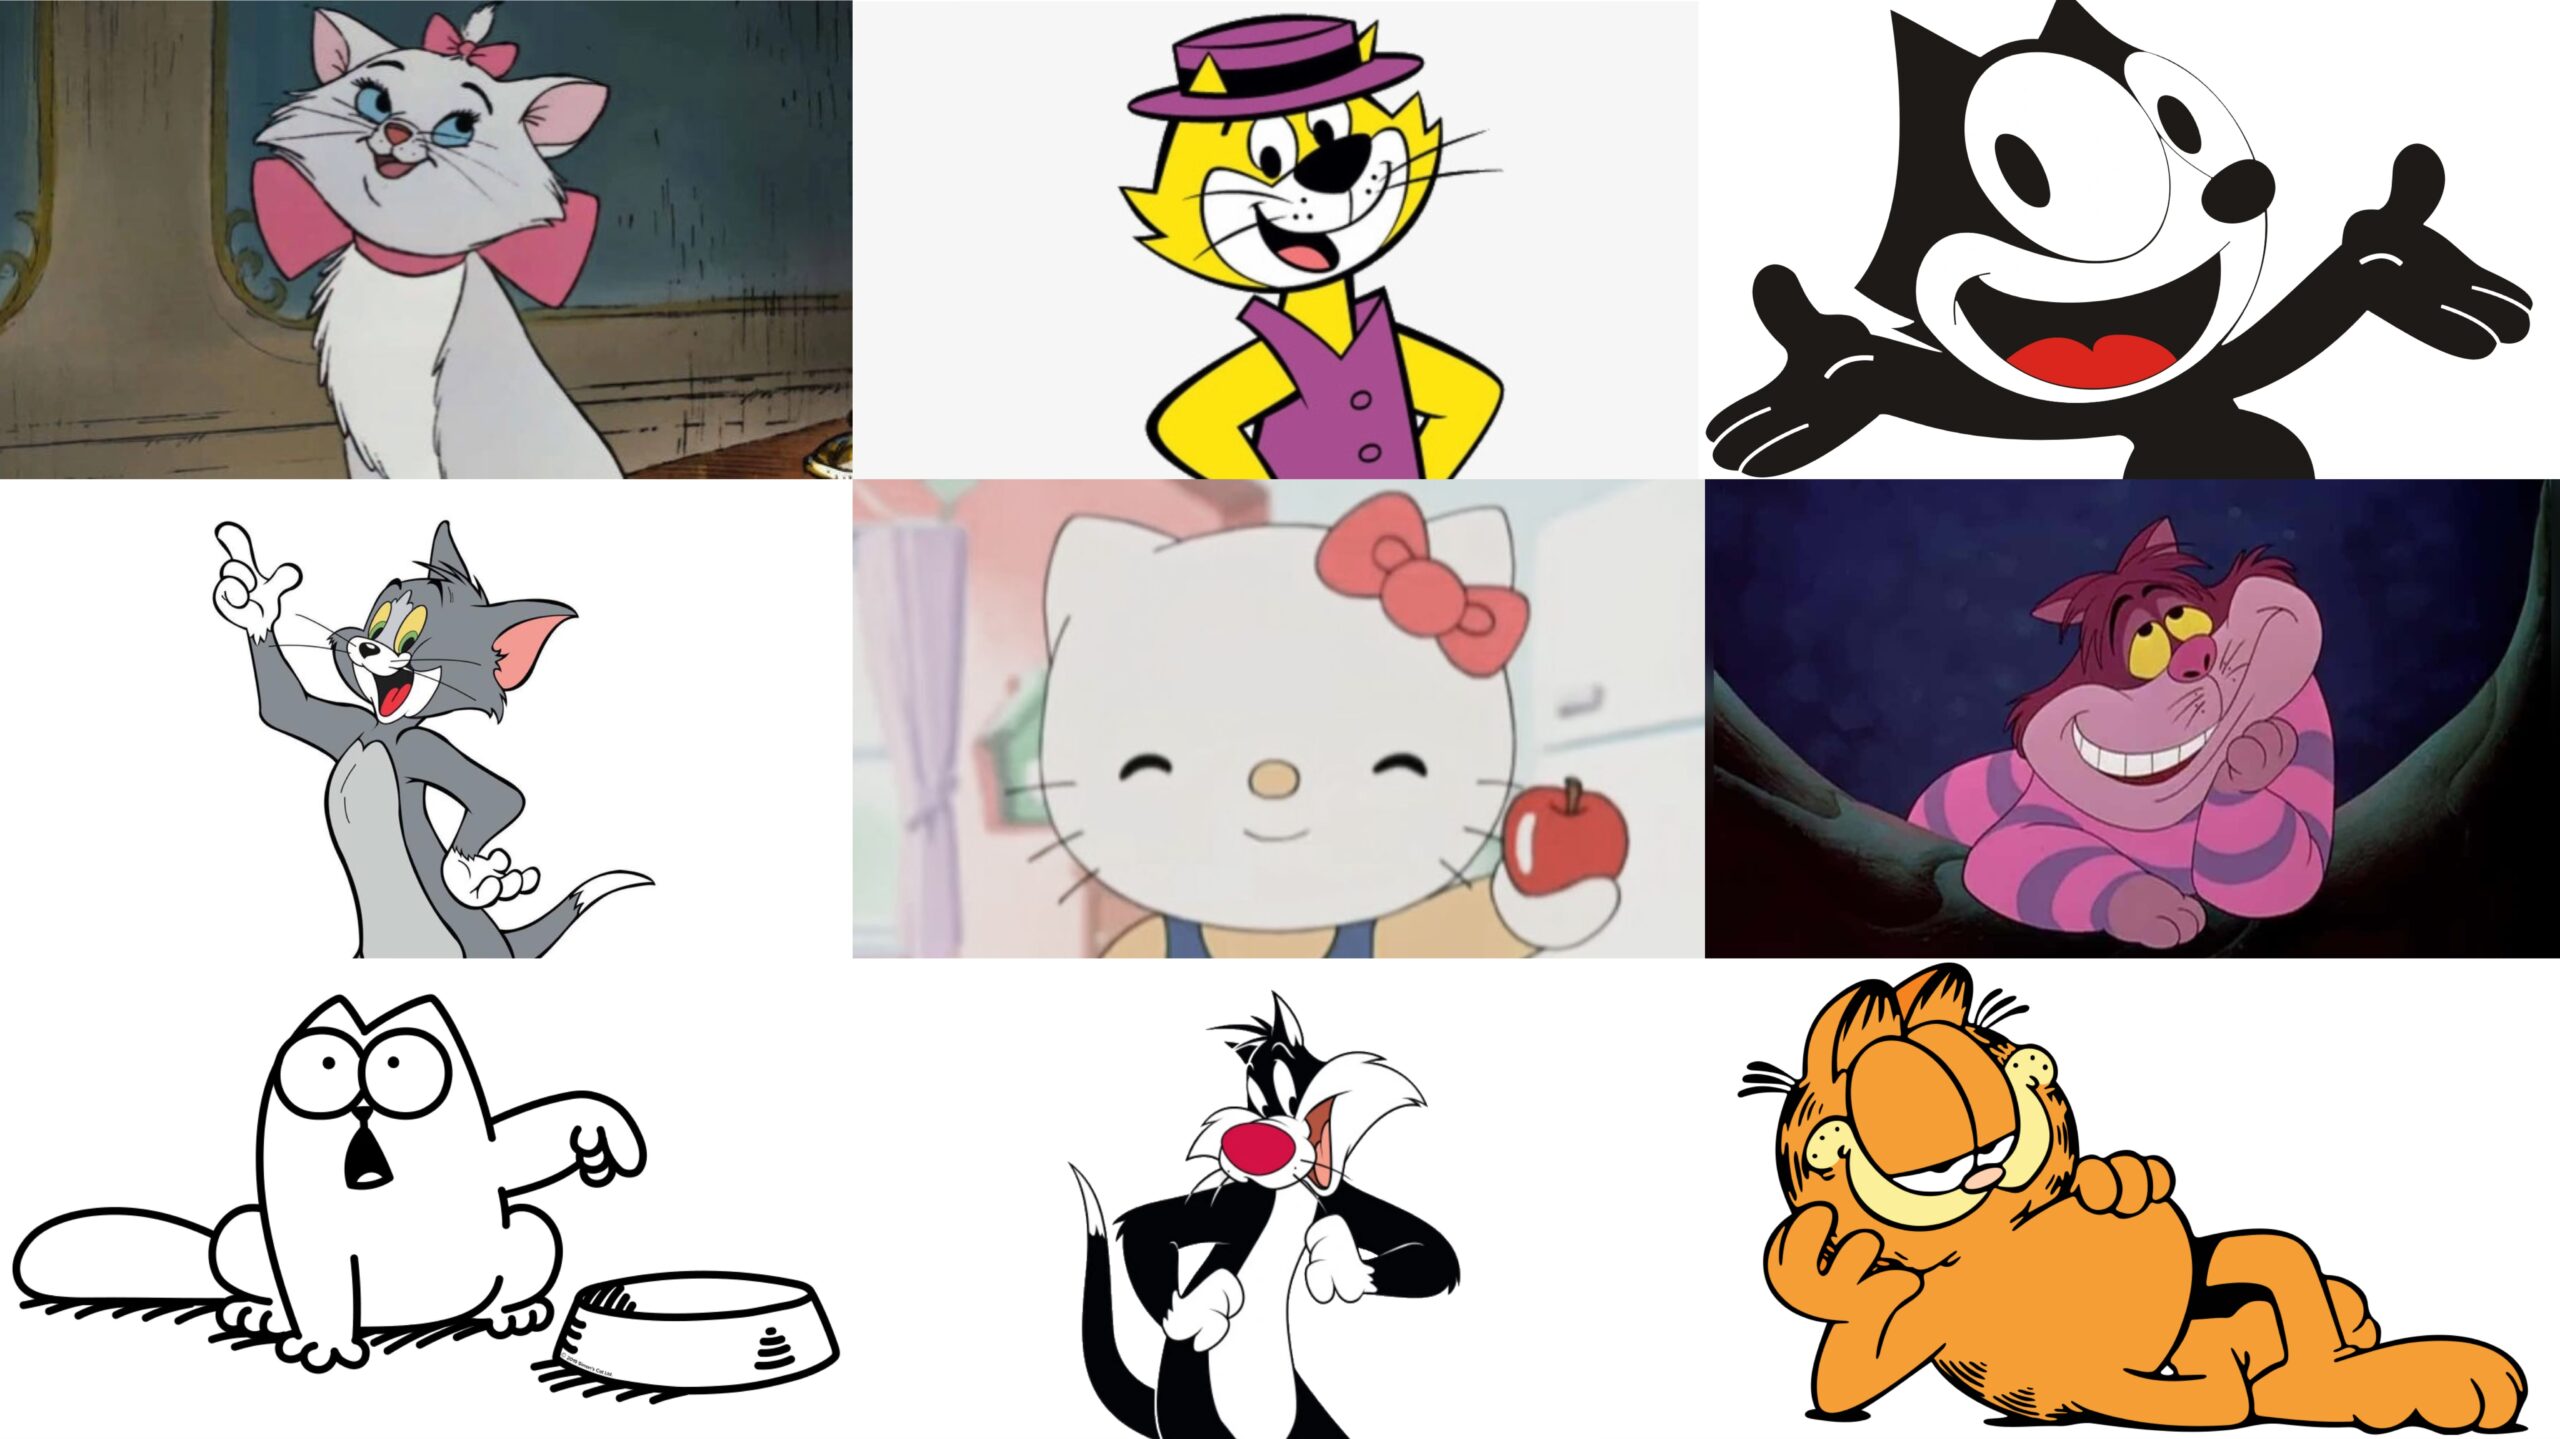 10 Famous Cartoon Cats That Captured Our Hearts - Toons Mag